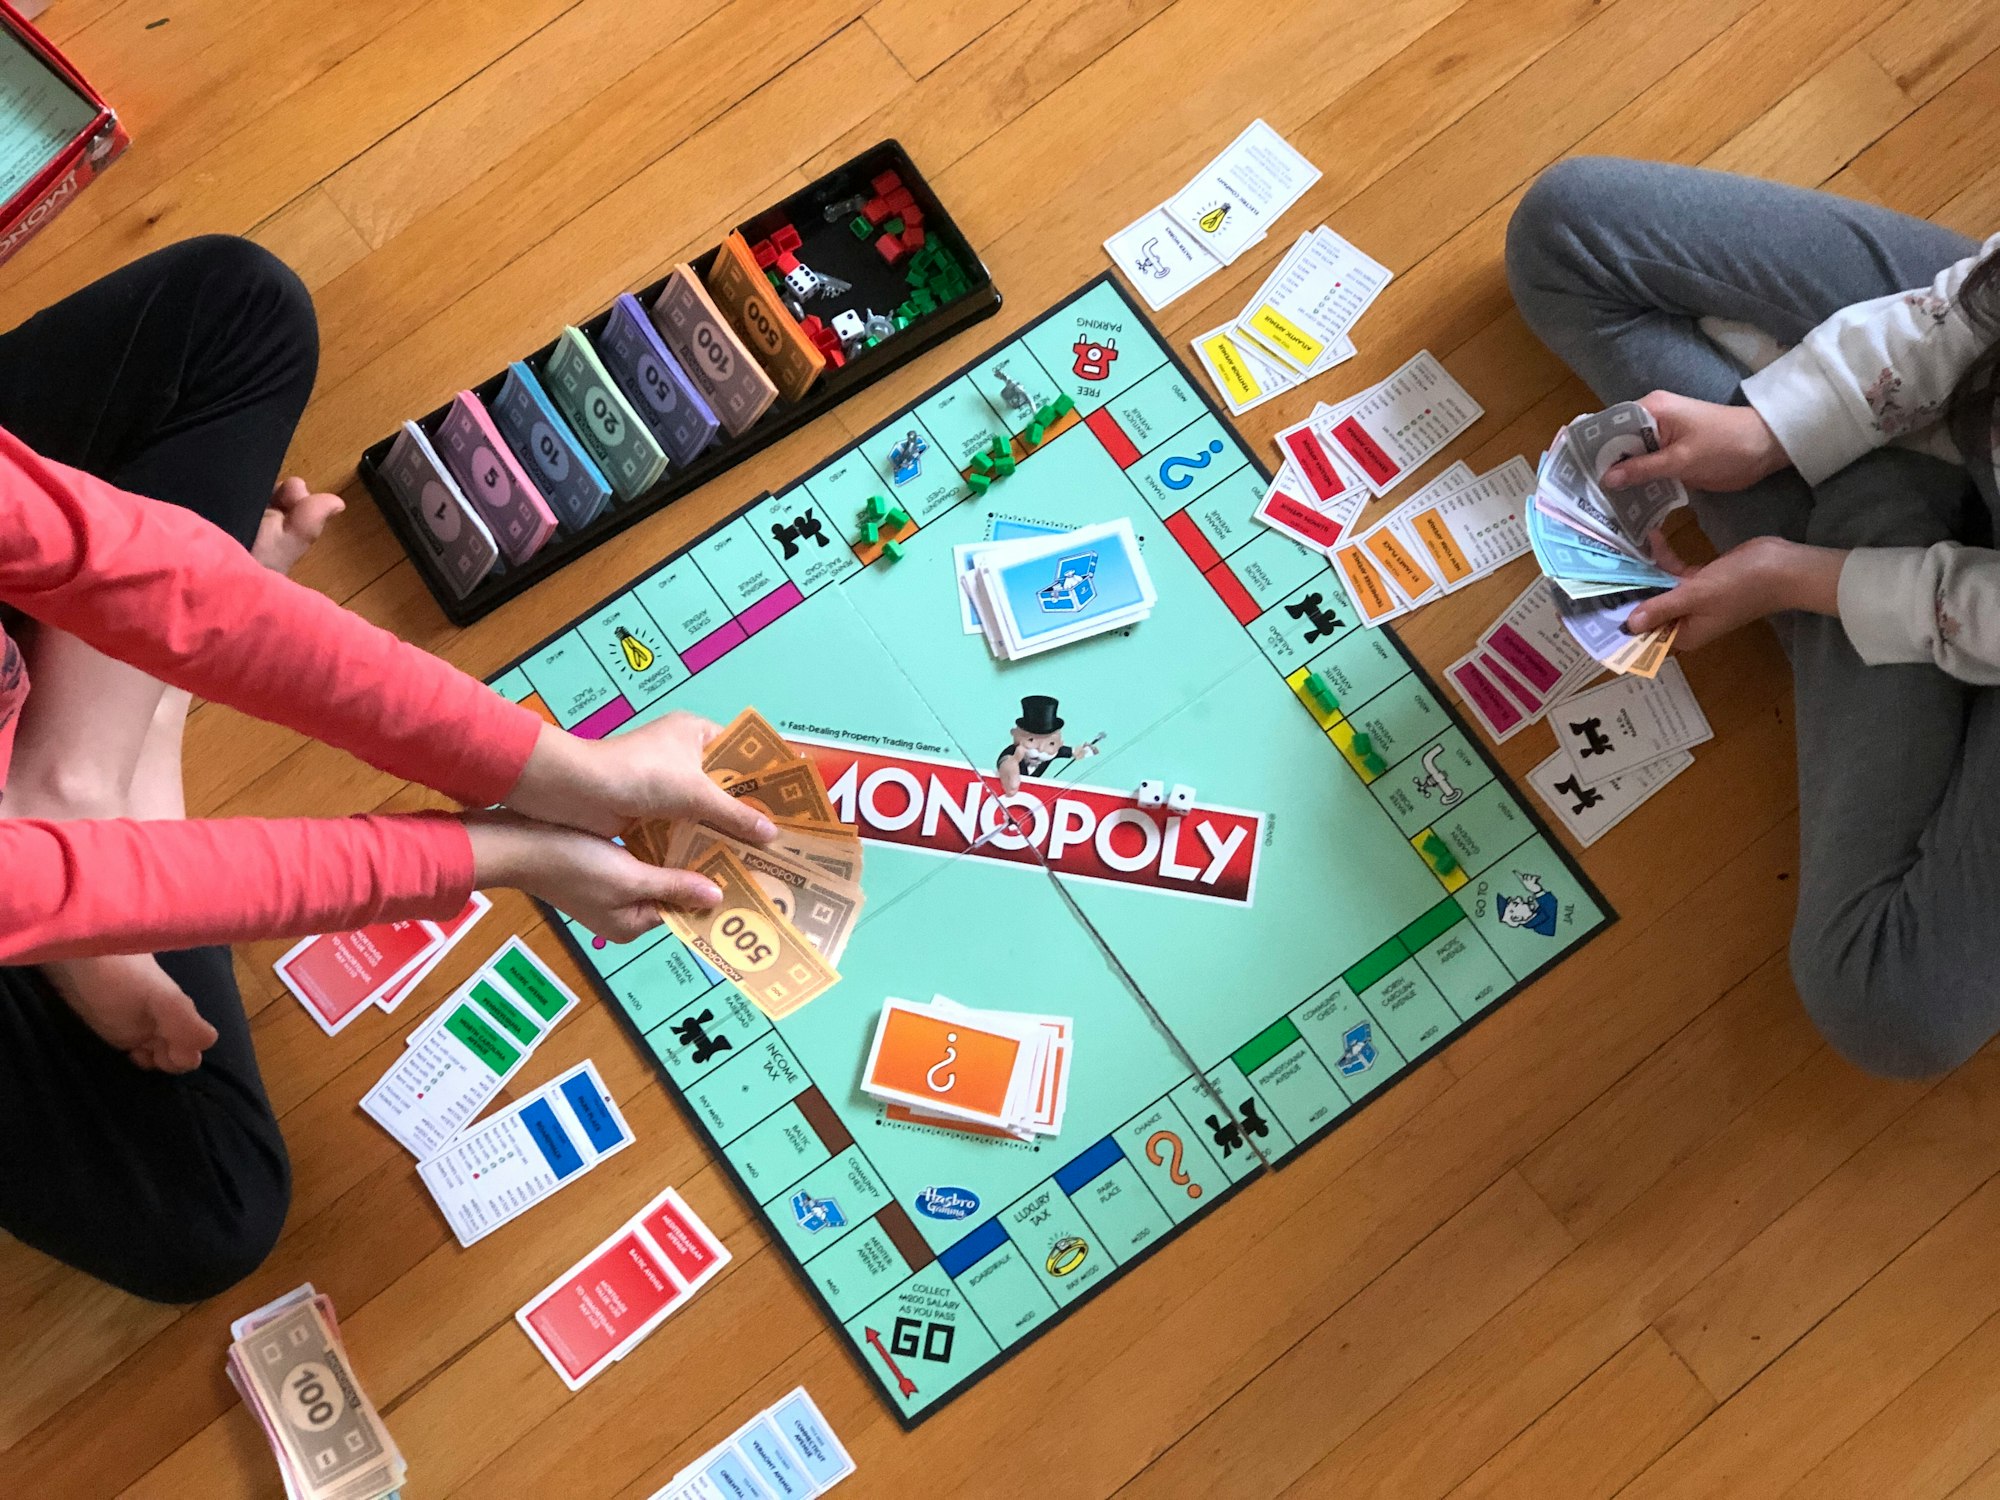 Playing Monopoly board game